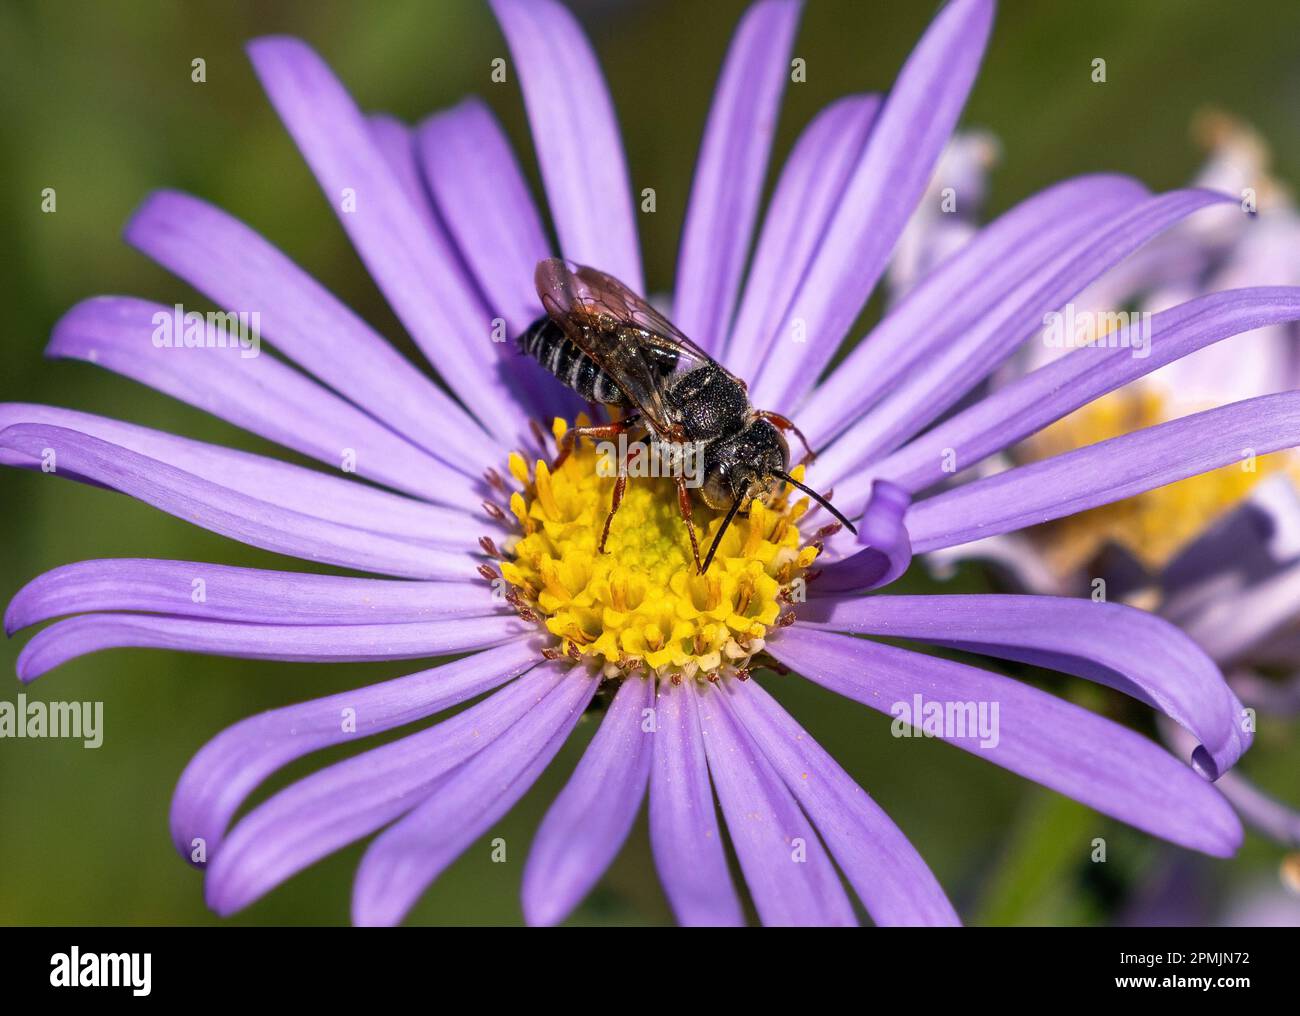 A Cuckoo Leafcutter bee (Coelioxys) on a Purple Aster flower. Stock Photo